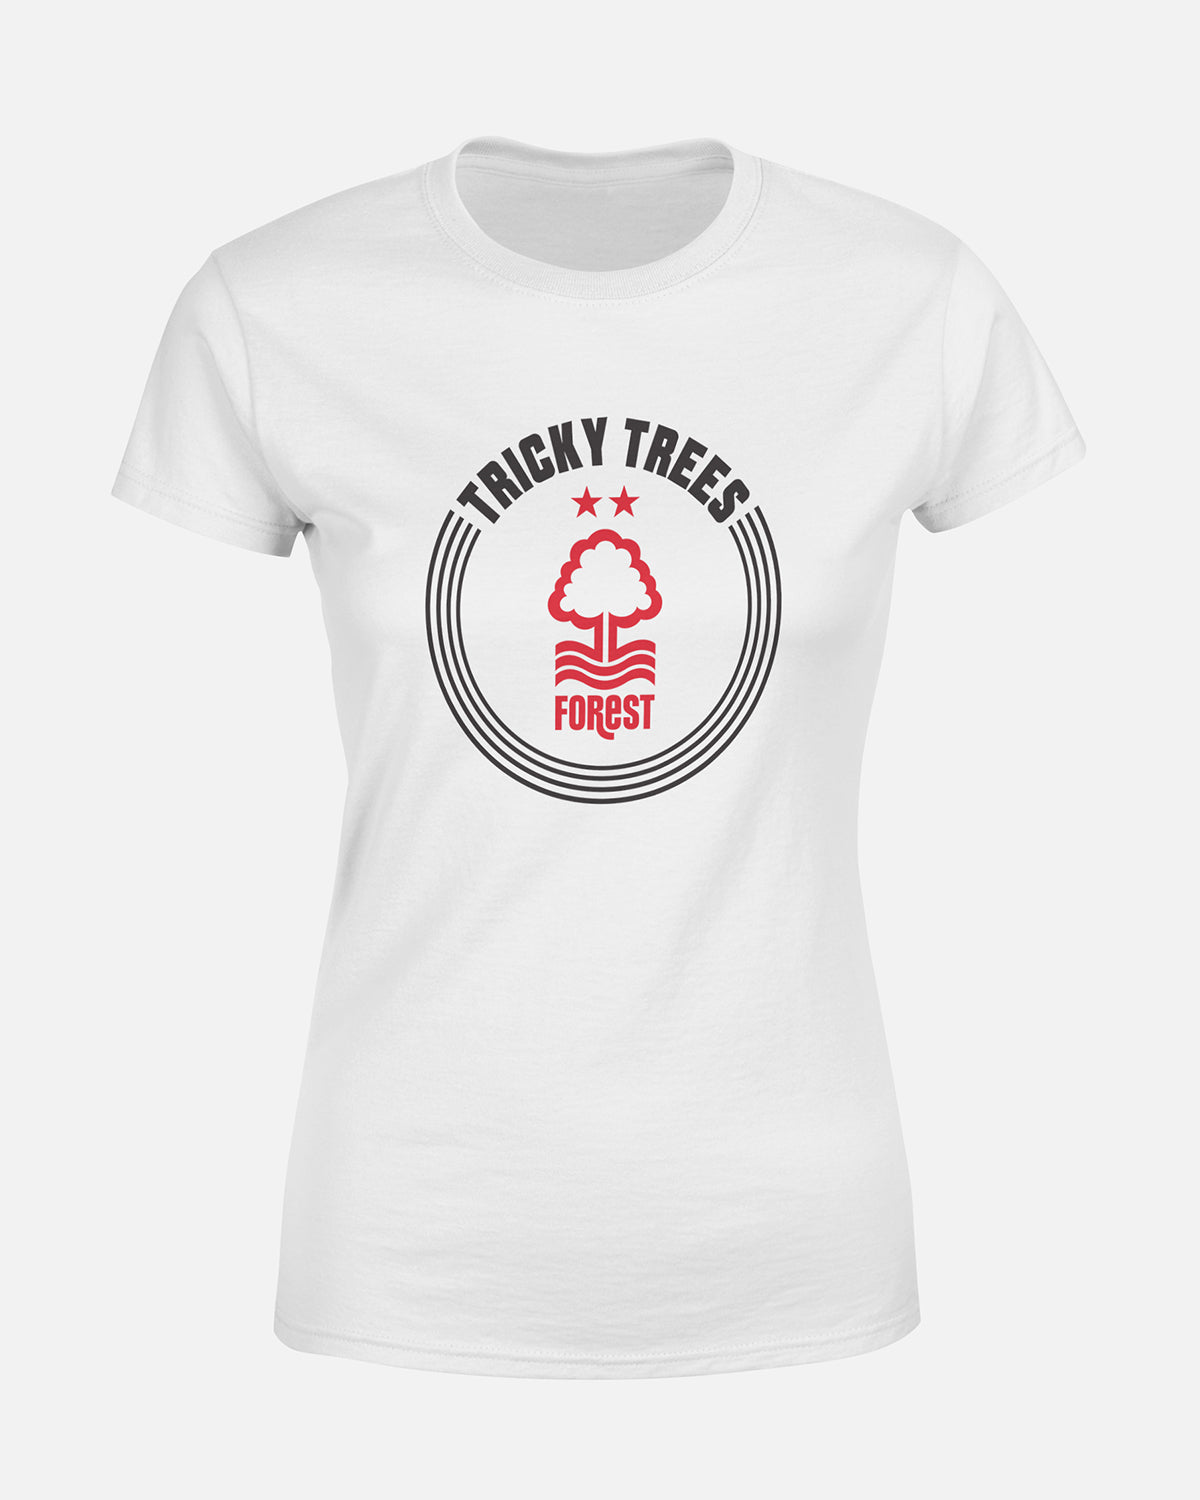 NFFC Women's White Tricky Trees Circle Tee